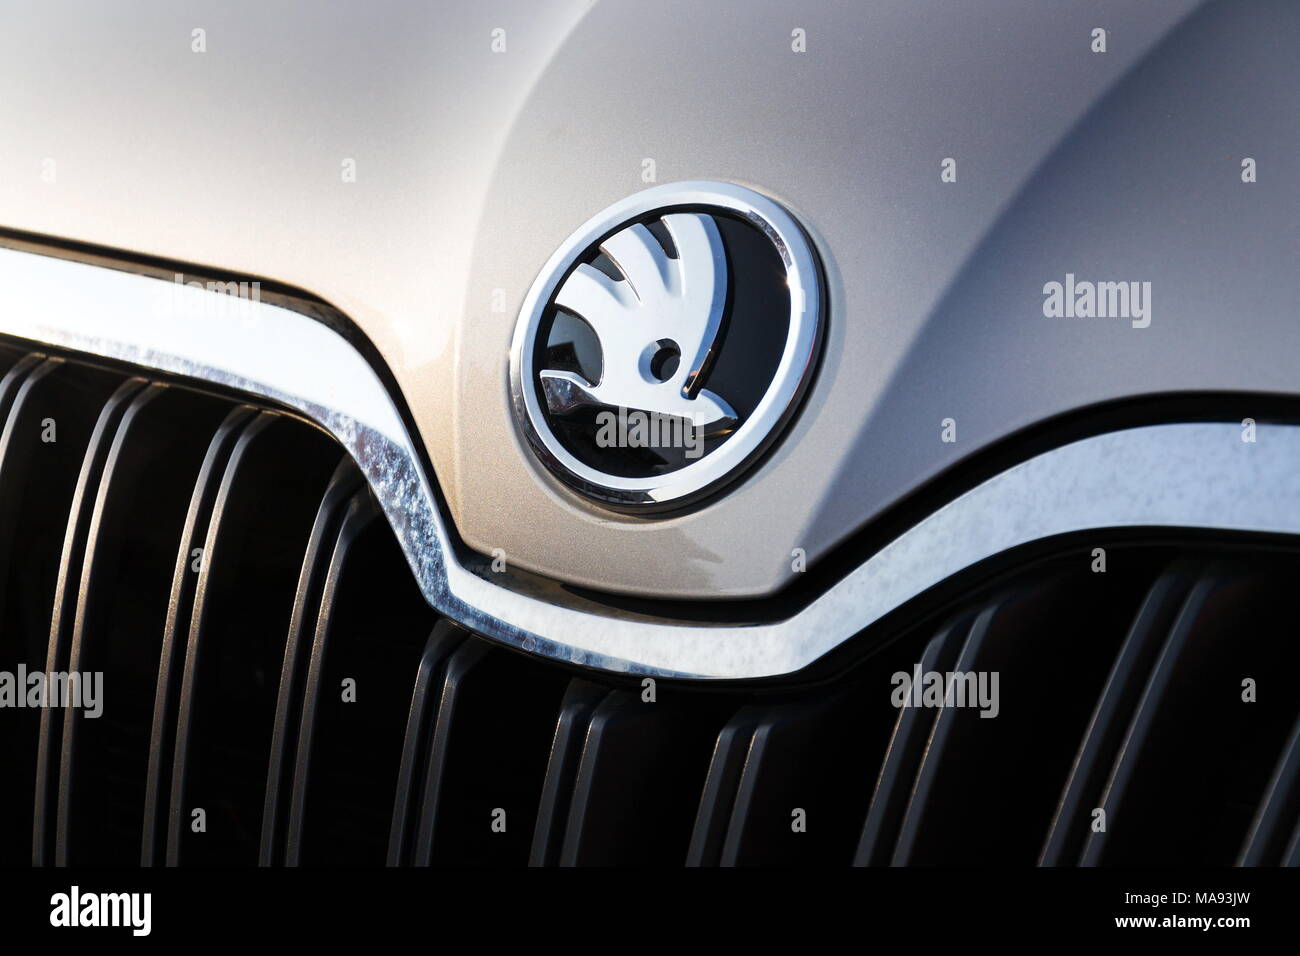 PRAGUE, CZECH REPUBLIC - MARCH 25 2018: Skoda Auto automobile manufacturer from Volkswagen Group company logo on new silver car on March 25, 2018 in P Stock Photo